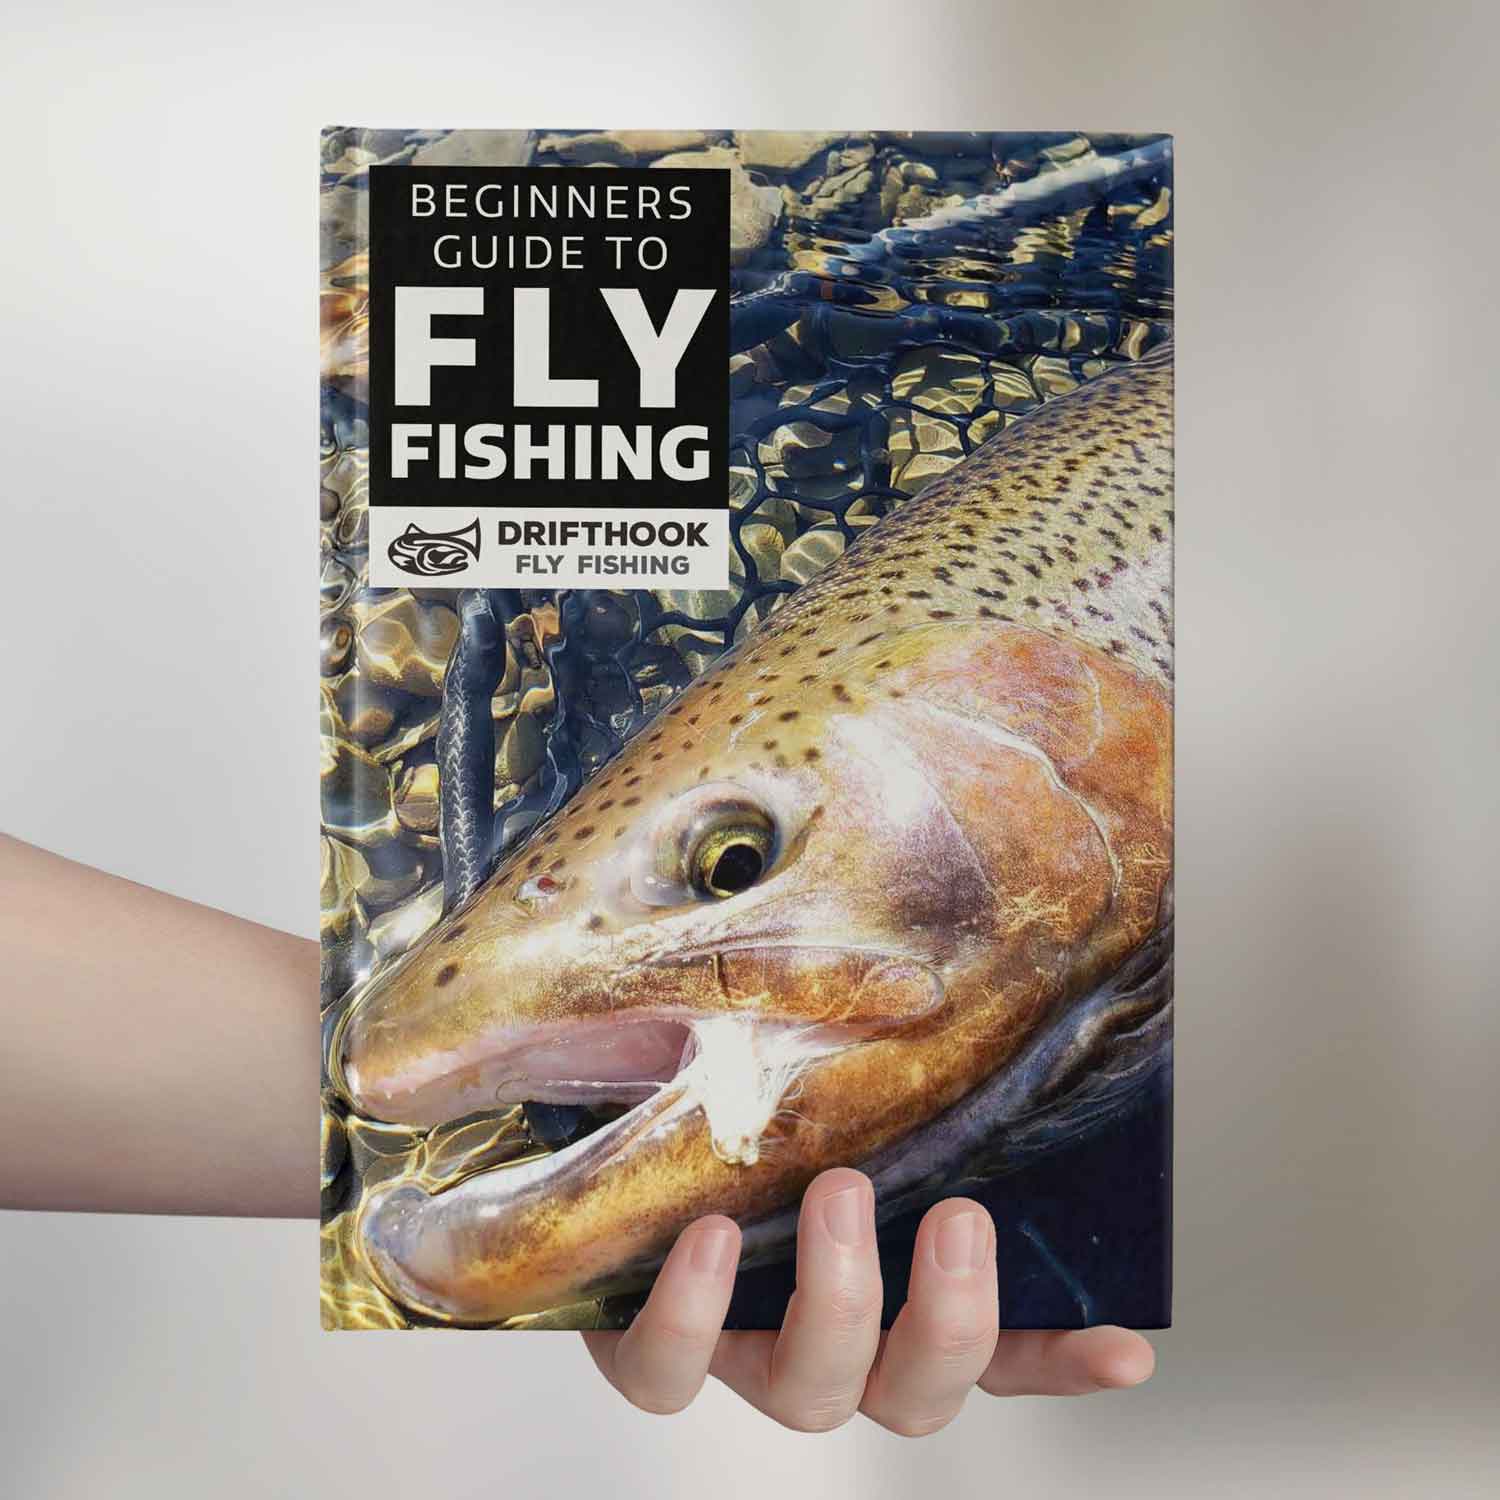 Learn To Fly Fish This Year – NWATROUT Fly Fishing Guide